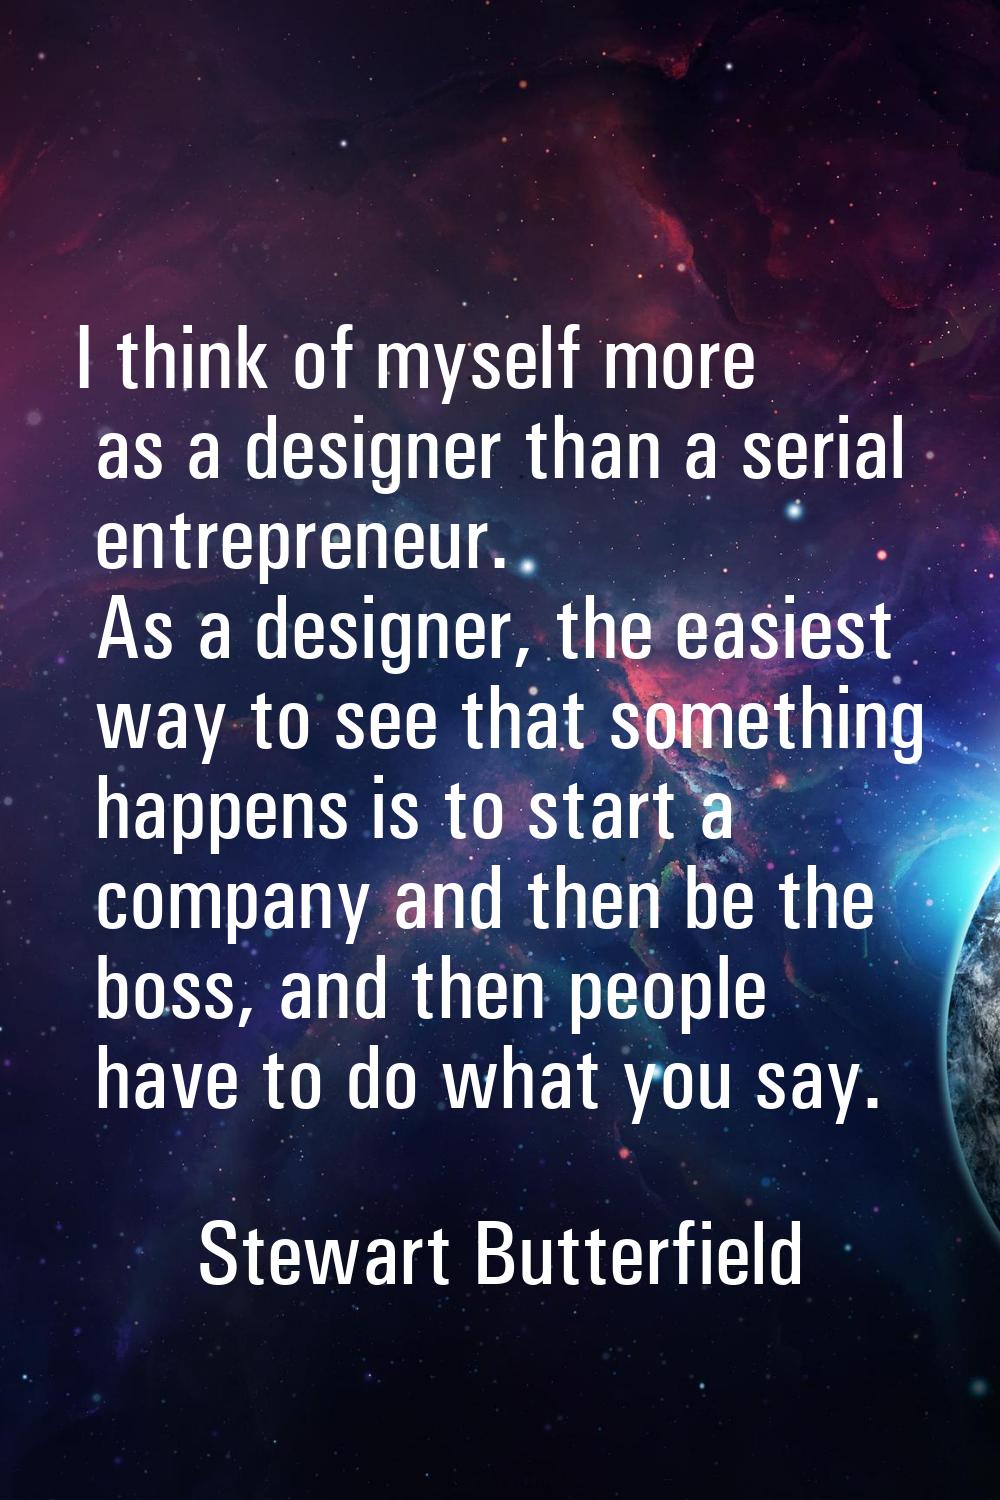 I think of myself more as a designer than a serial entrepreneur. As a designer, the easiest way to 